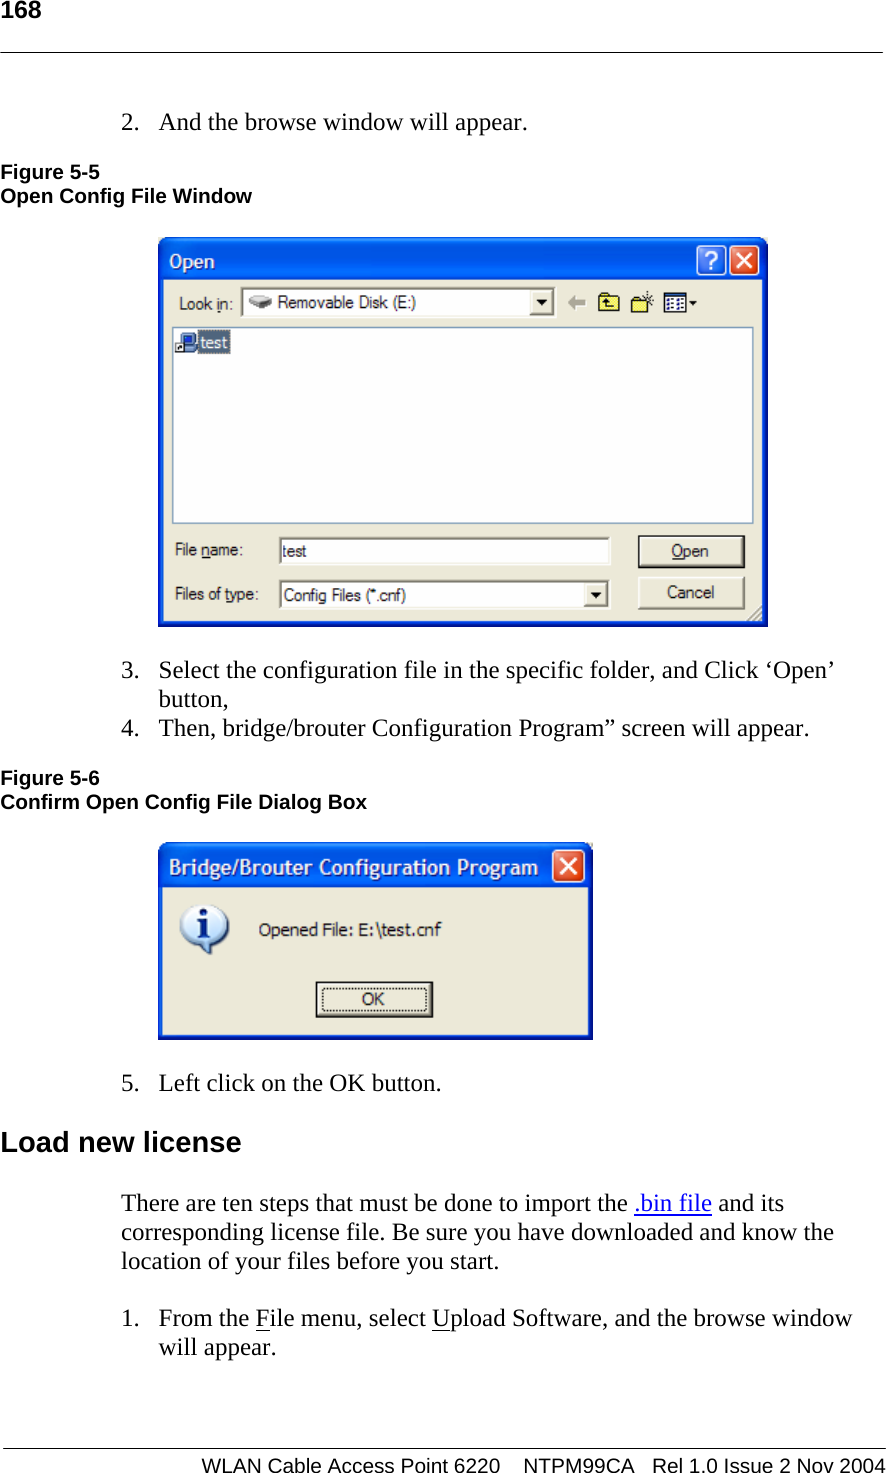   168    WLAN Cable Access Point 6220    NTPM99CA   Rel 1.0 Issue 2 Nov 2004 2. And the browse window will appear.  Figure 5-5 Open Config File Window    3. Select the configuration file in the specific folder, and Click ‘Open’ button, 4. Then, bridge/brouter Configuration Program” screen will appear.  Figure 5-6 Confirm Open Config File Dialog Box    5. Left click on the OK button.  Load new license There are ten steps that must be done to import the .bin file and its corresponding license file. Be sure you have downloaded and know the location of your files before you start. 1. From the File menu, select Upload Software, and the browse window will appear. 